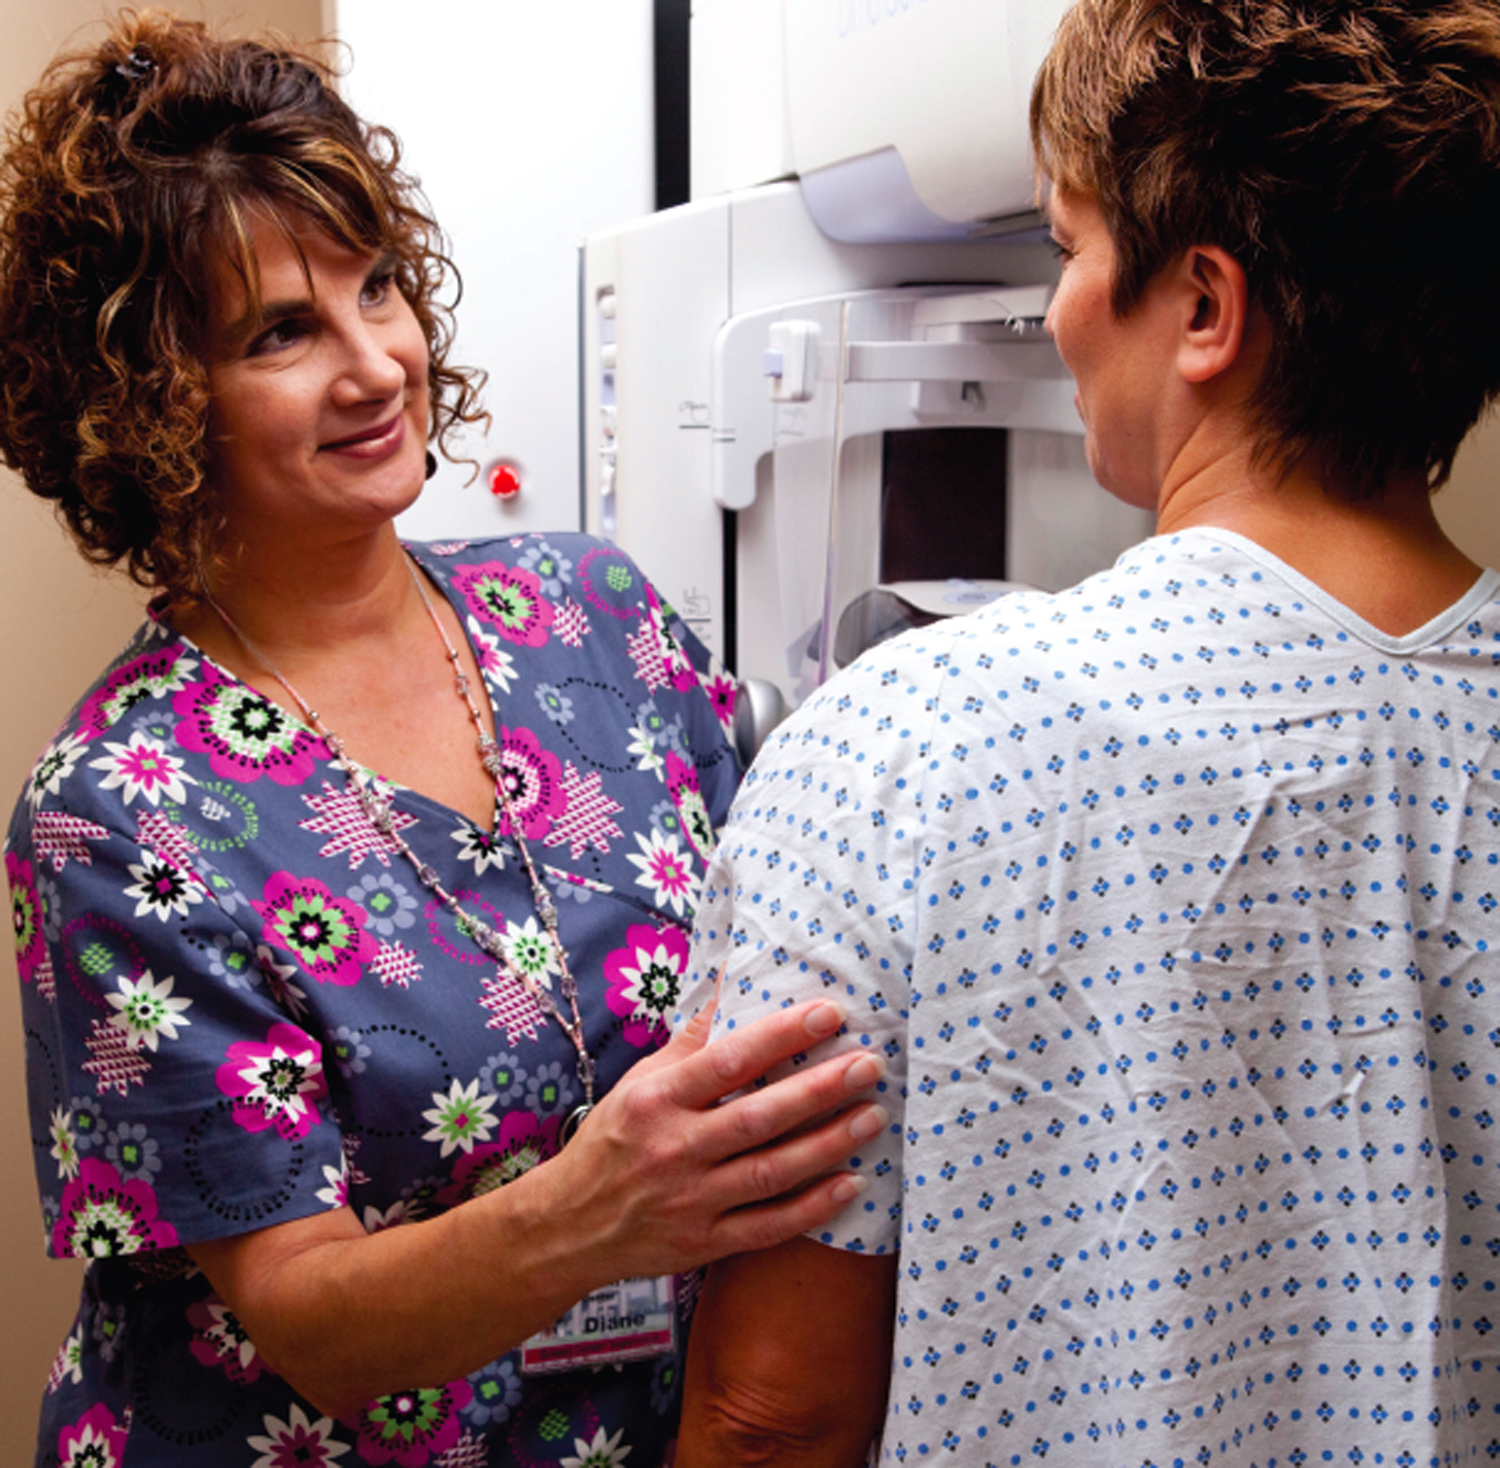 Diane Coady, R.T. (R)(M), breast center supervisor, talks to a patient about the 3D mammogram provided by Willamette Valley Medical Center.